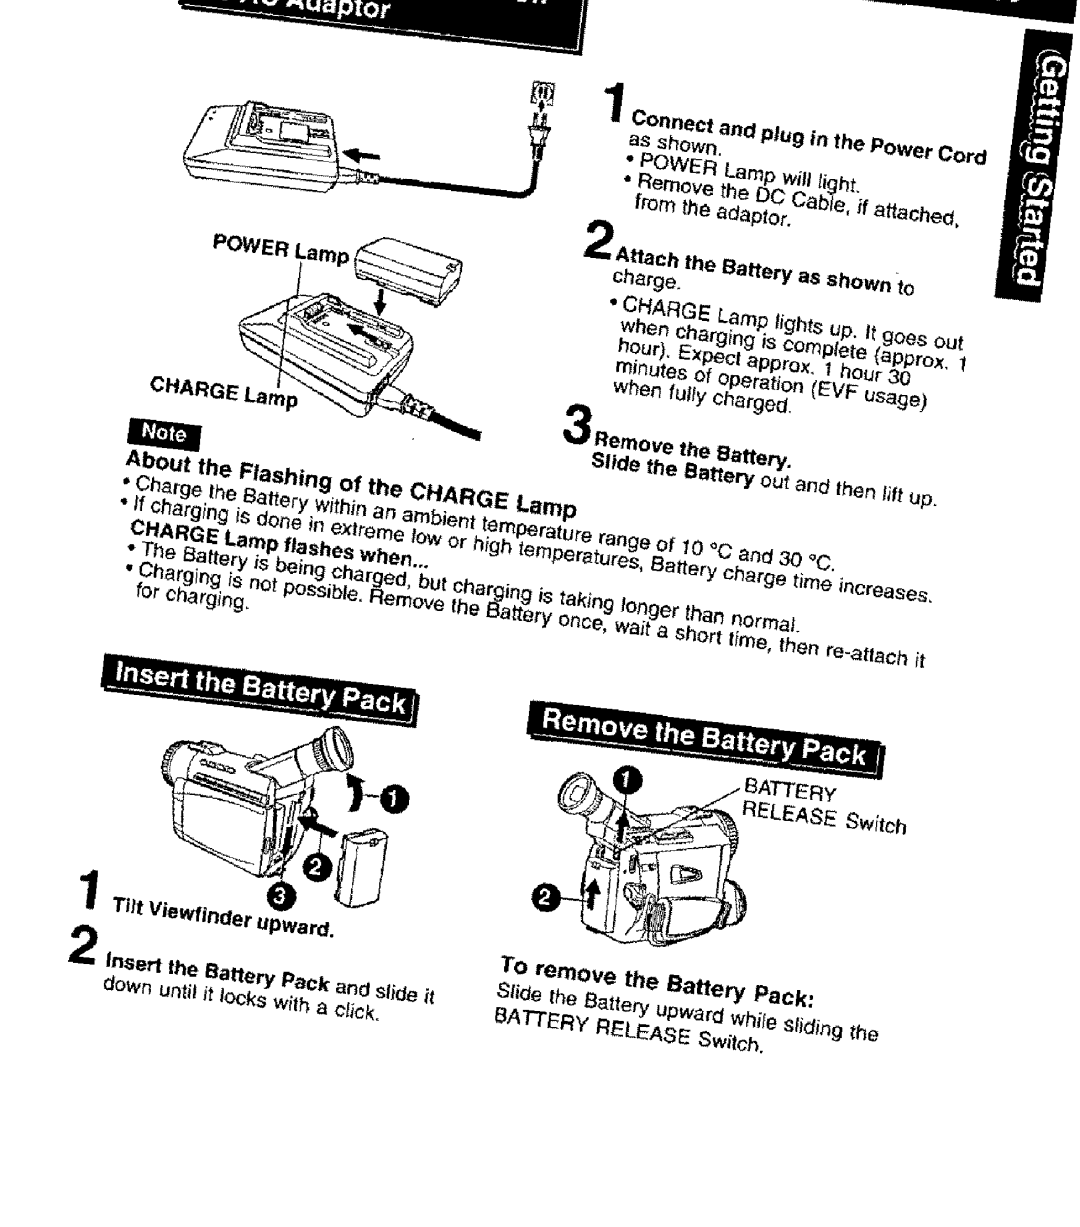 Panasonic PV-DV101 manual POWER Lamp CHARG About the Flashing of the CHARGE Lamp 